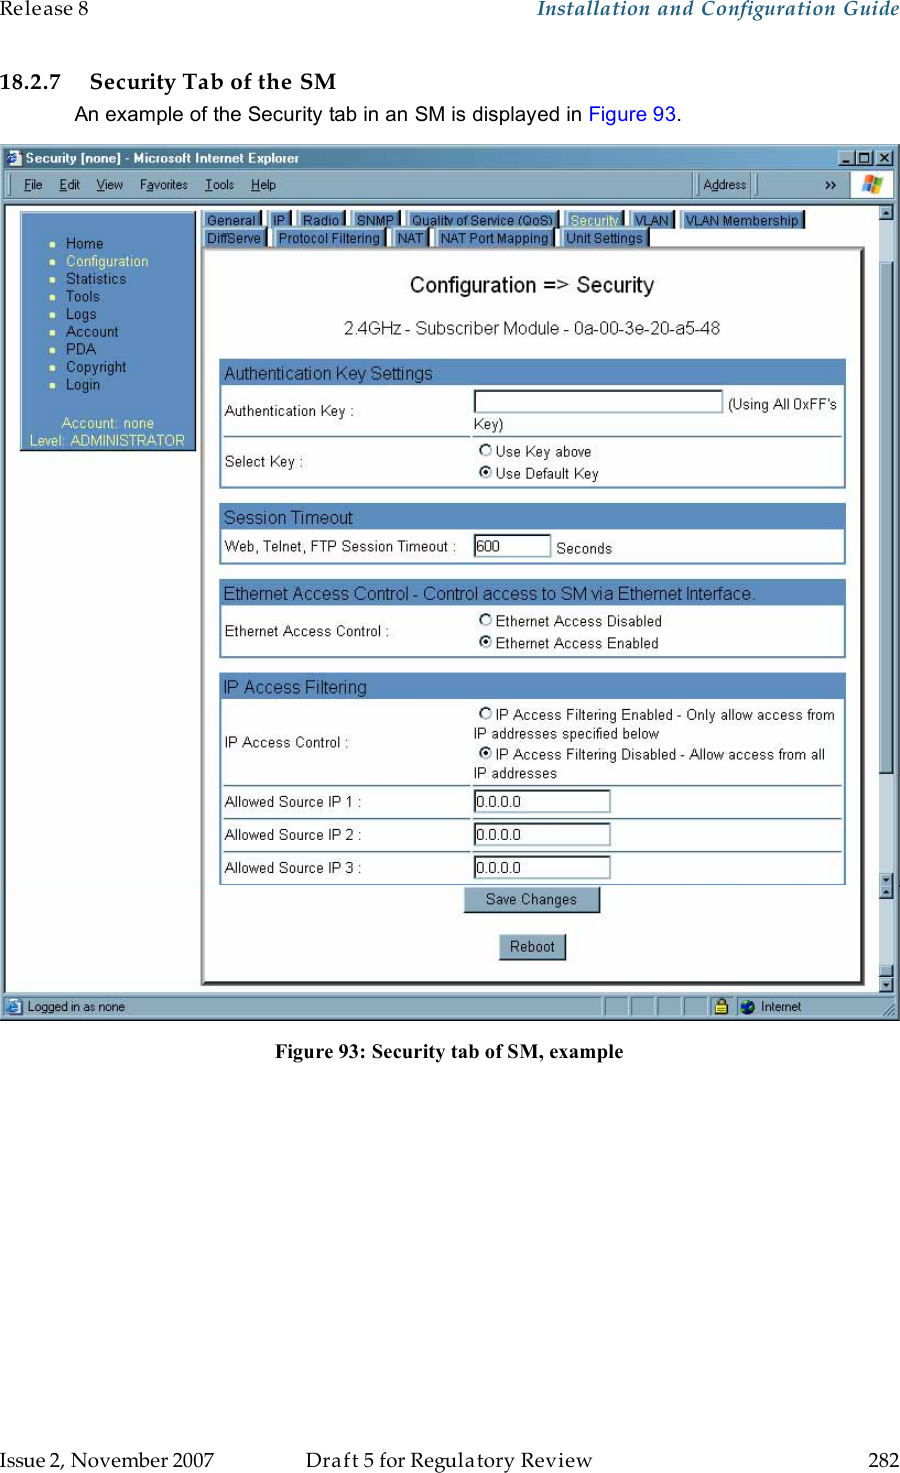 Release 8    Installation and Configuration Guide   Issue 2, November 2007  Draft 5 for Regulatory Review  282     18.2.7 Security Tab of the SM An example of the Security tab in an SM is displayed in Figure 93.  Figure 93: Security tab of SM, example  